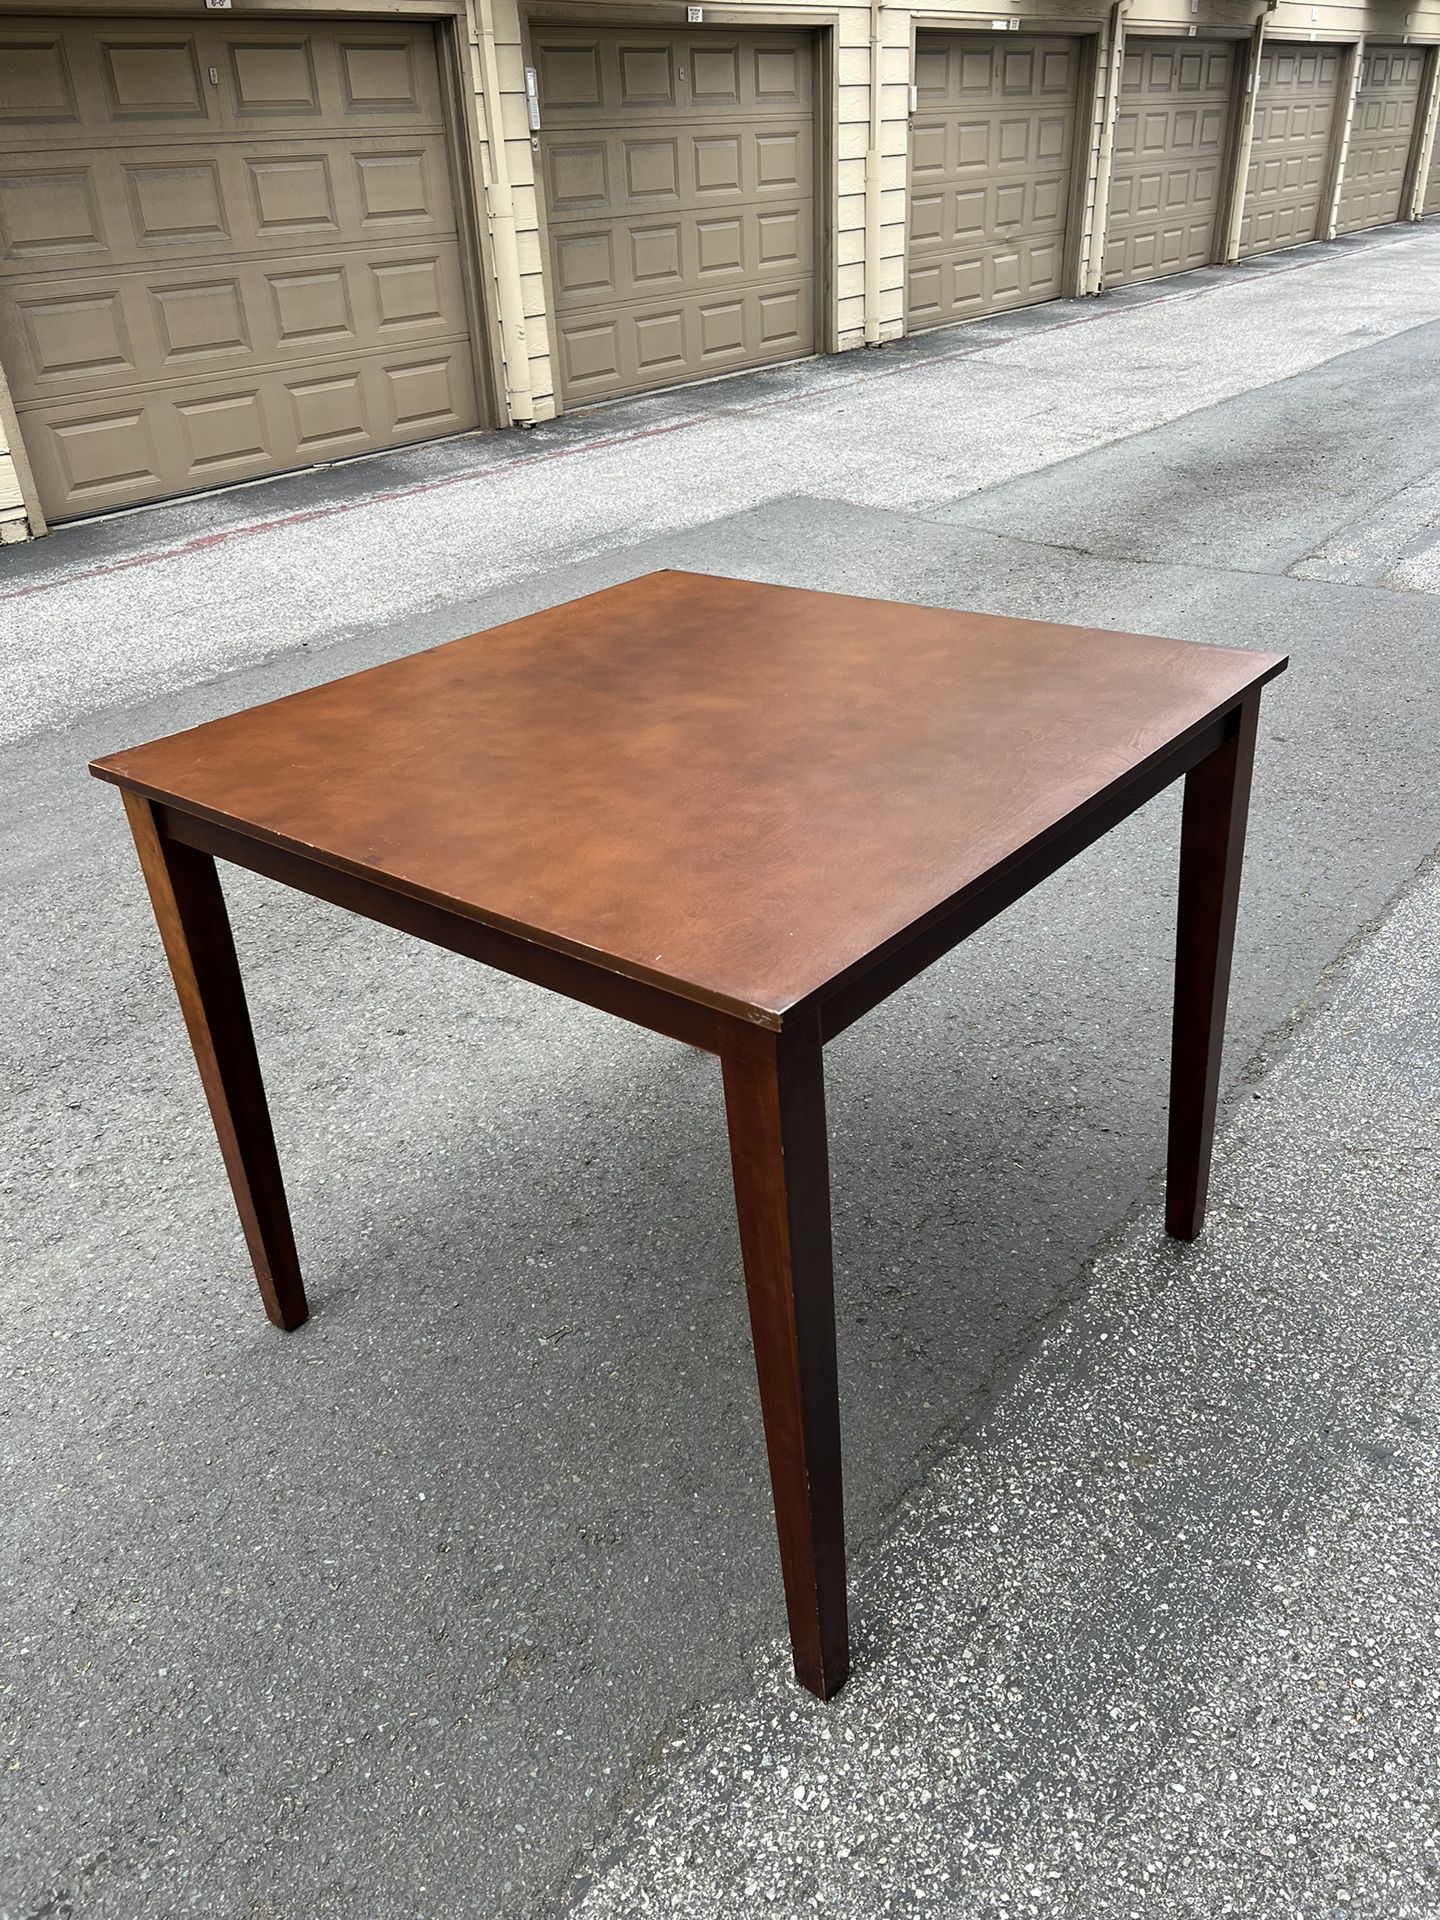 Wood Table With Glass Top